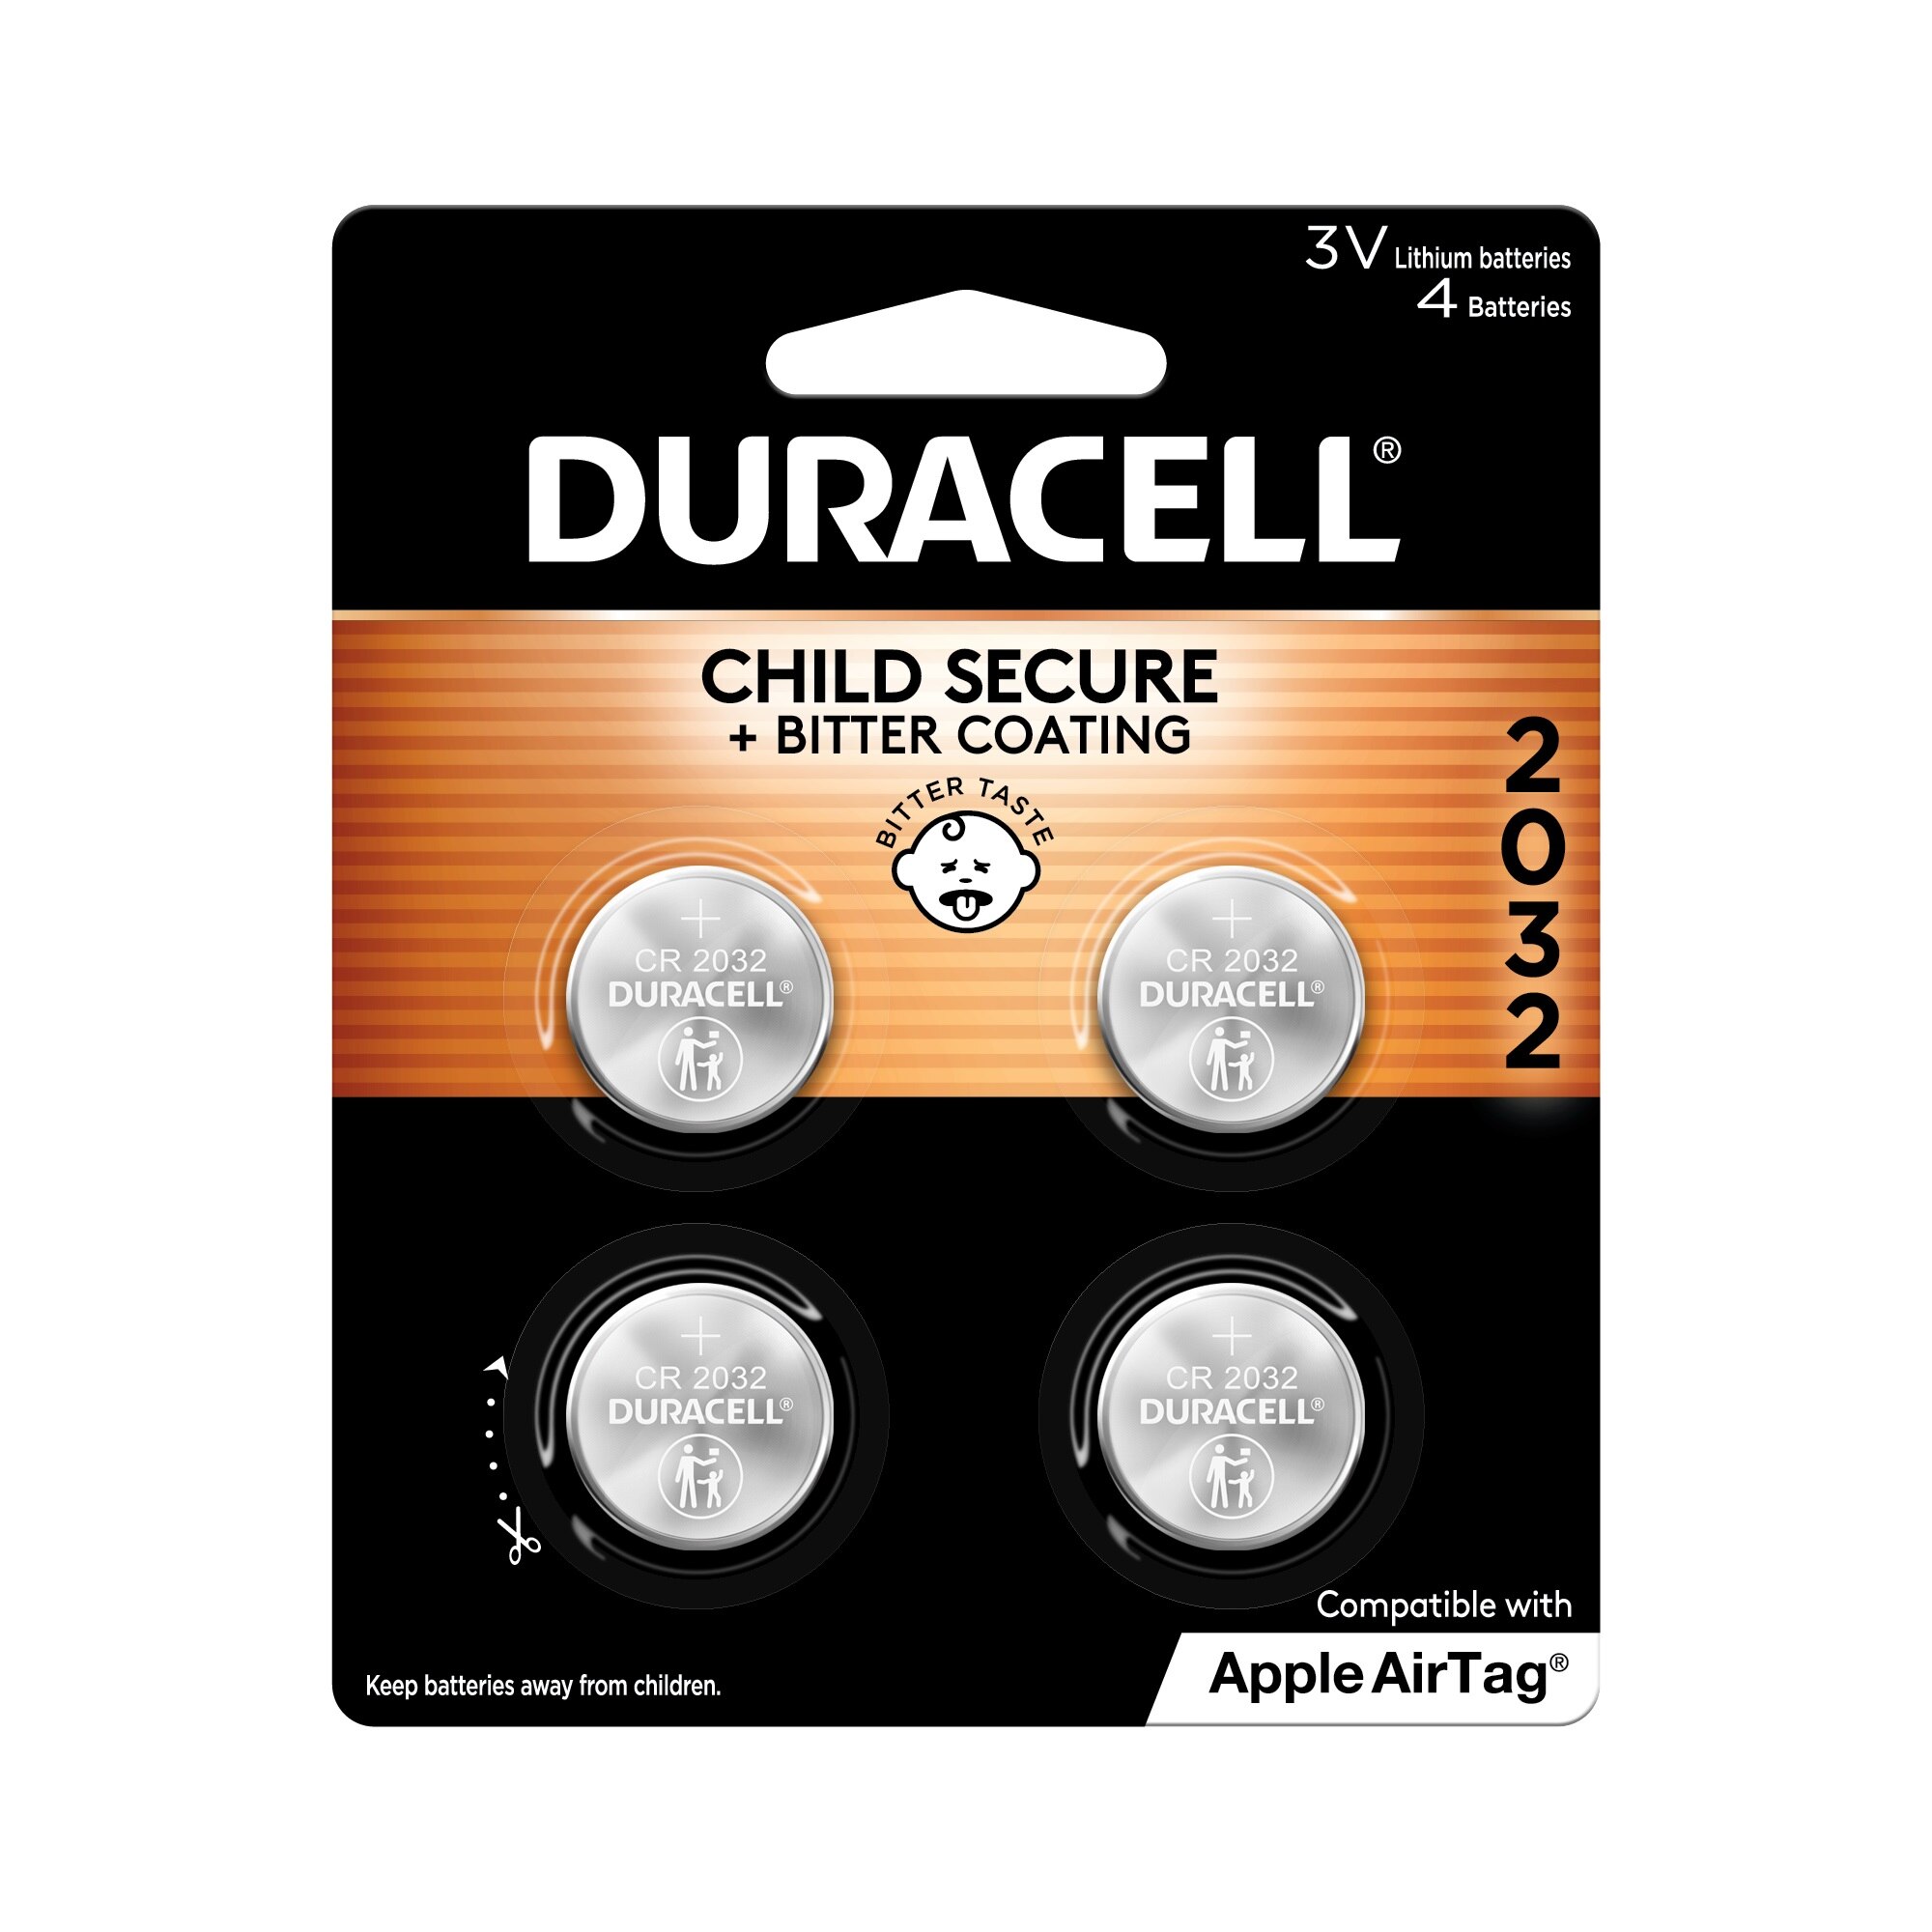 Duracell 2032 3V Lithium Coin Battery with Bitter Coating, 4/PK